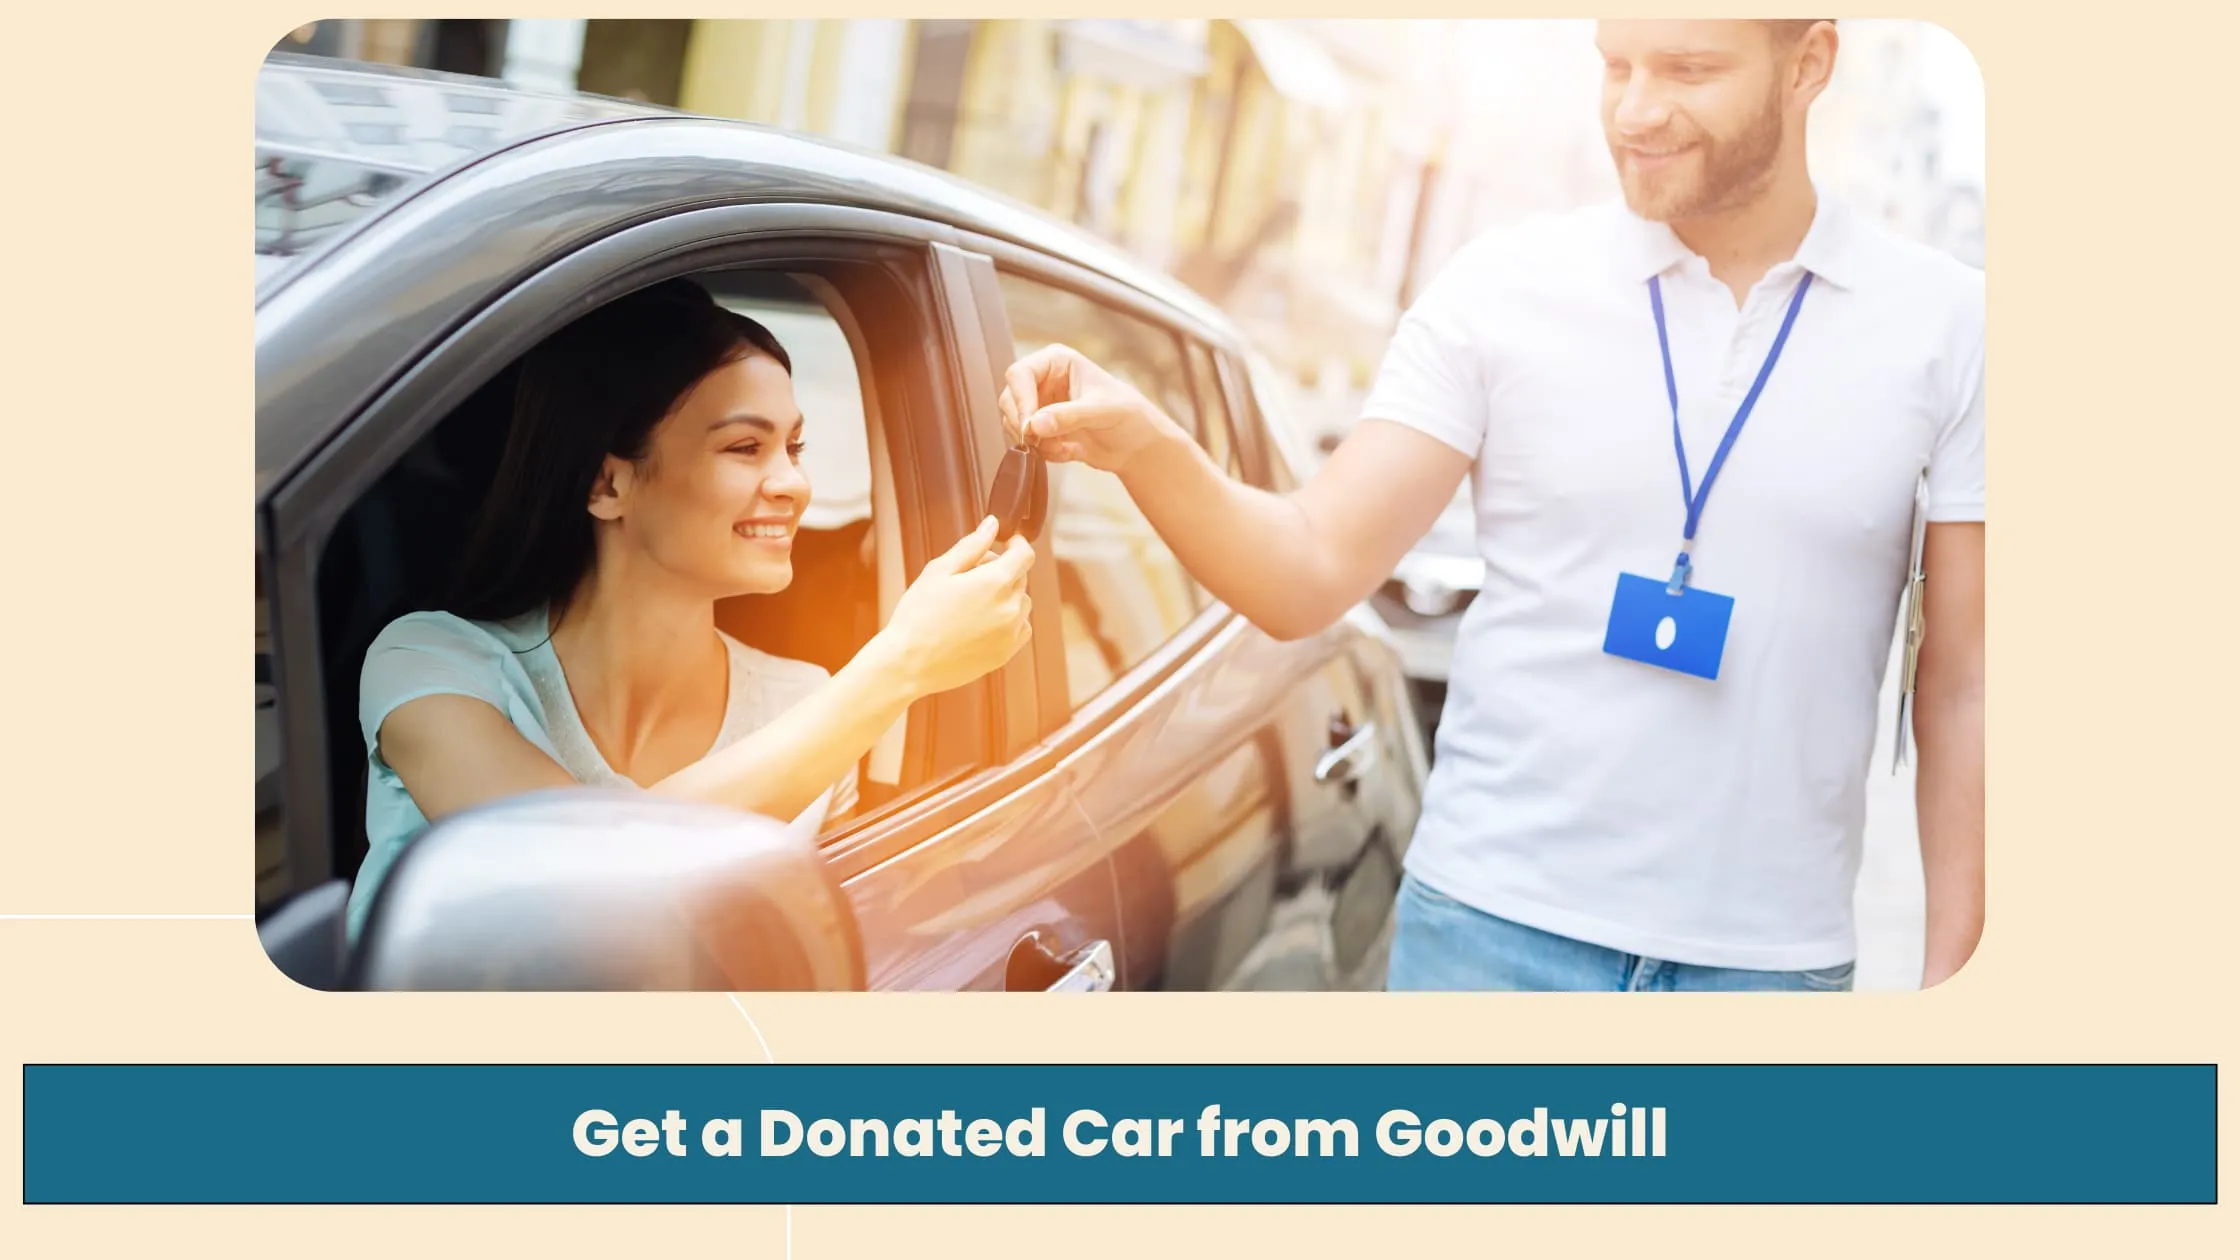 Get a Donated Car from Goodwill